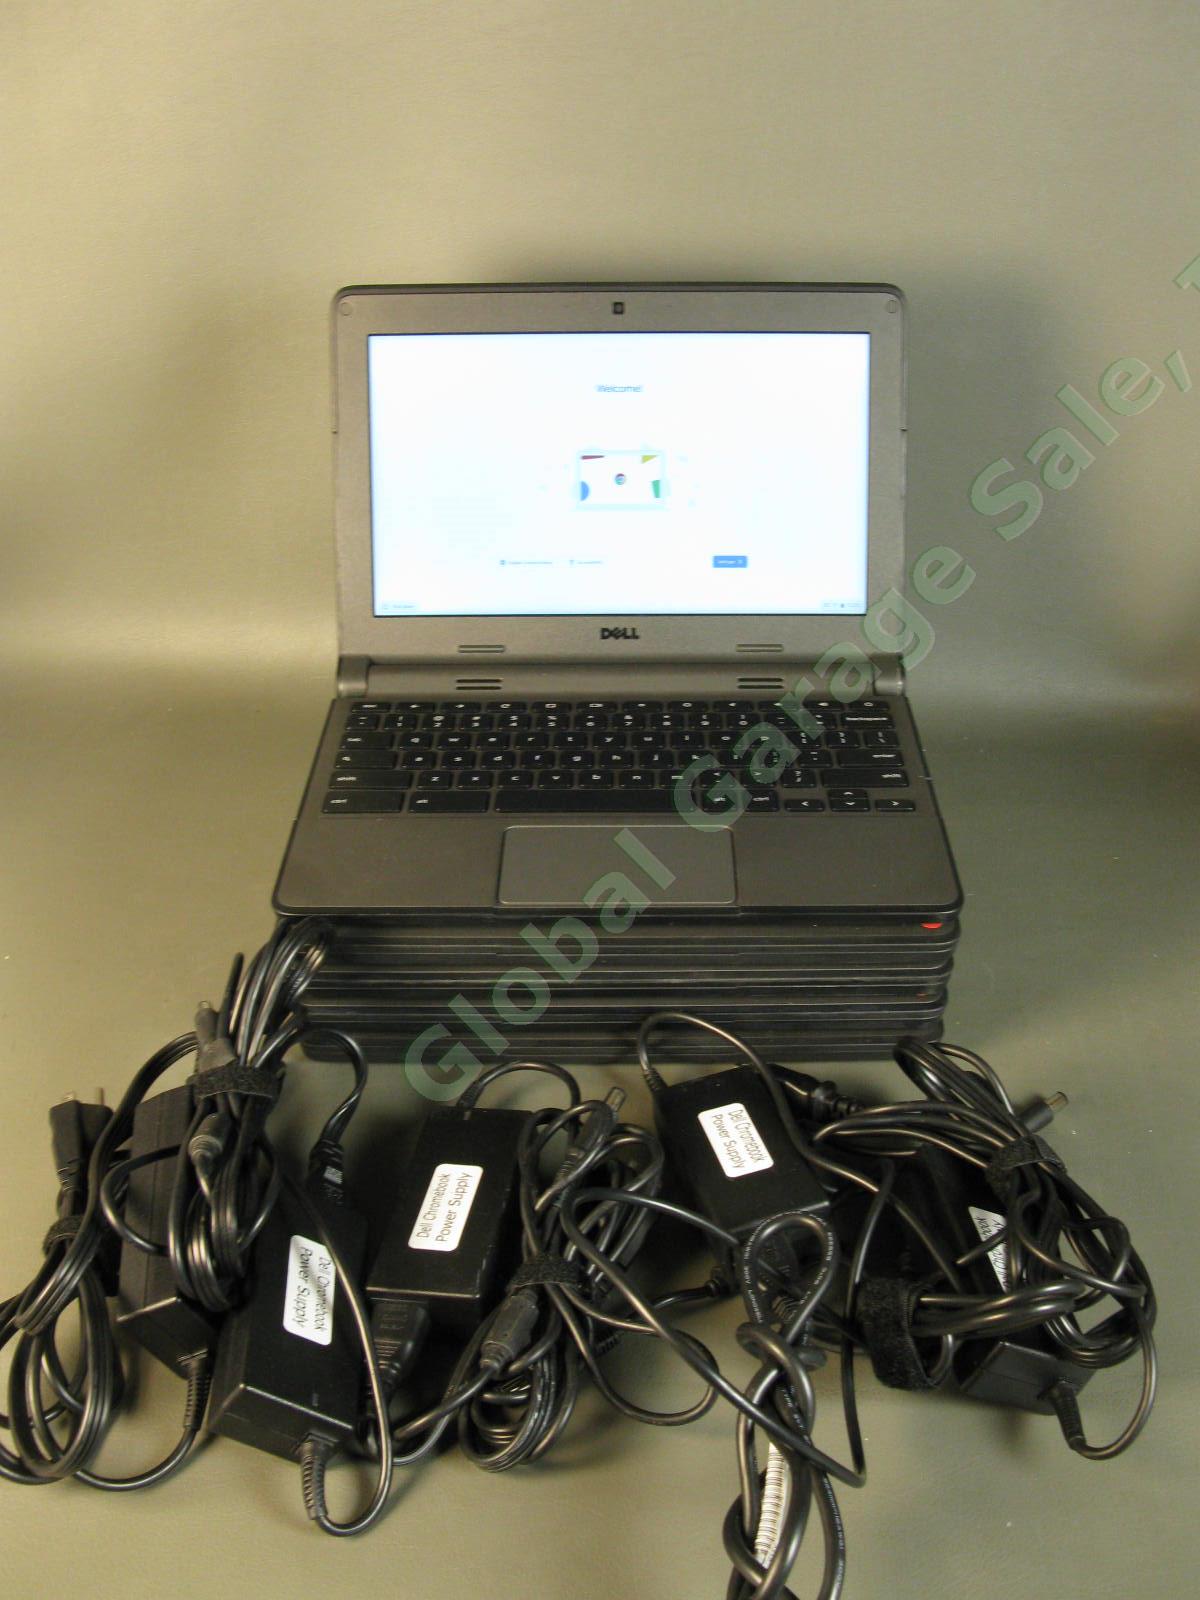 LOT of 5 Dell Chromebook 11 3120 P22T Laptop Computers 16GB SSD 4GB RAM Chargers